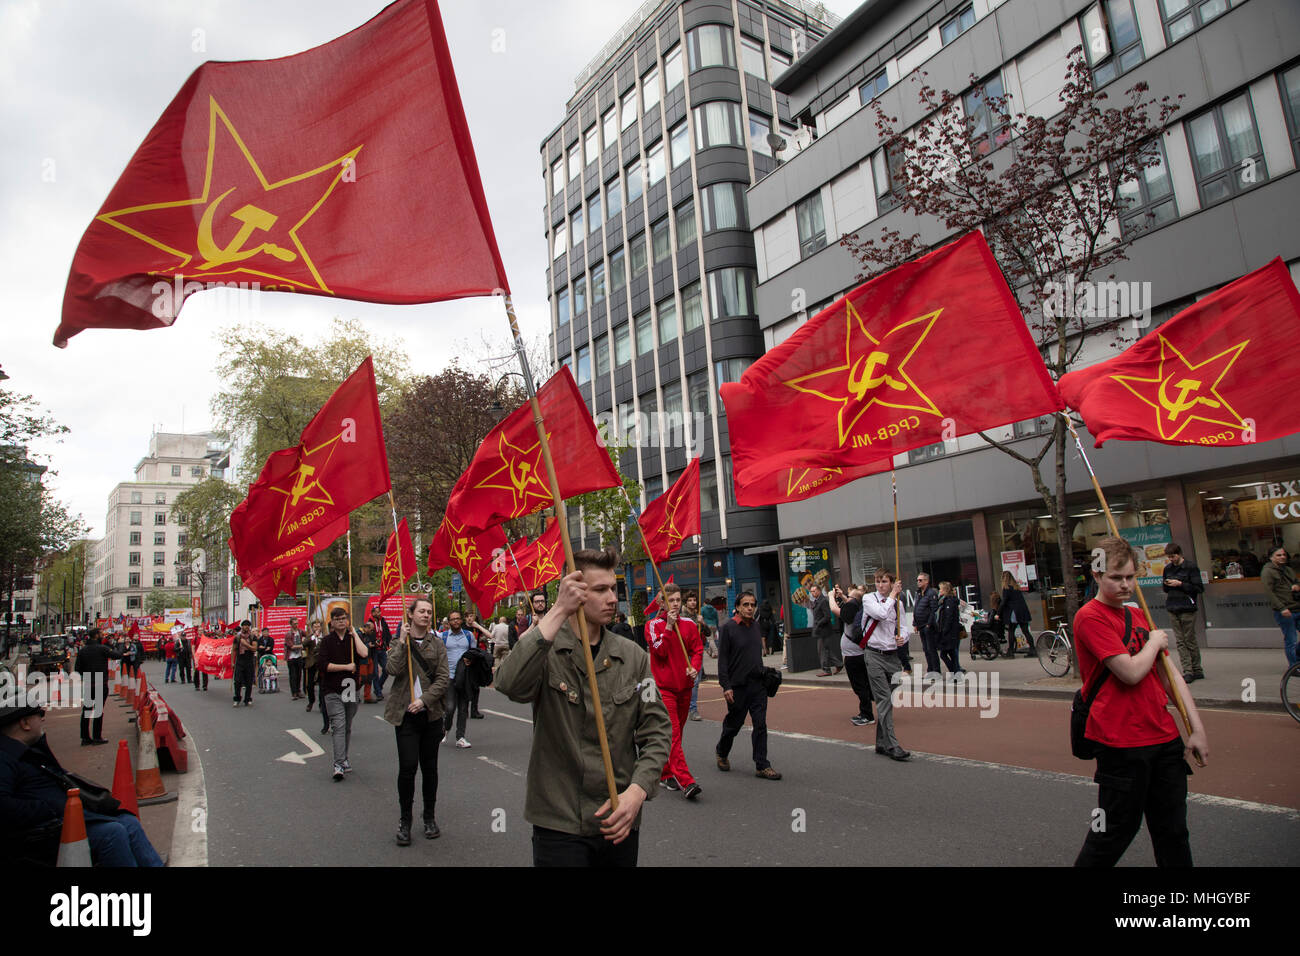 London, UK. 1st May, 2018. Communist Party of Great Britain red flags during May Day celebrations in London, England, United Kingdom. Demonstration by unions and other organisations of workers to mark the annual May Day or Labour Day. Groups from all nationalities from around the World, living in London gathered to march to a rally in central London to mark the global workers day. Credit: Michael Kemp/Alamy Live News Stock Photo